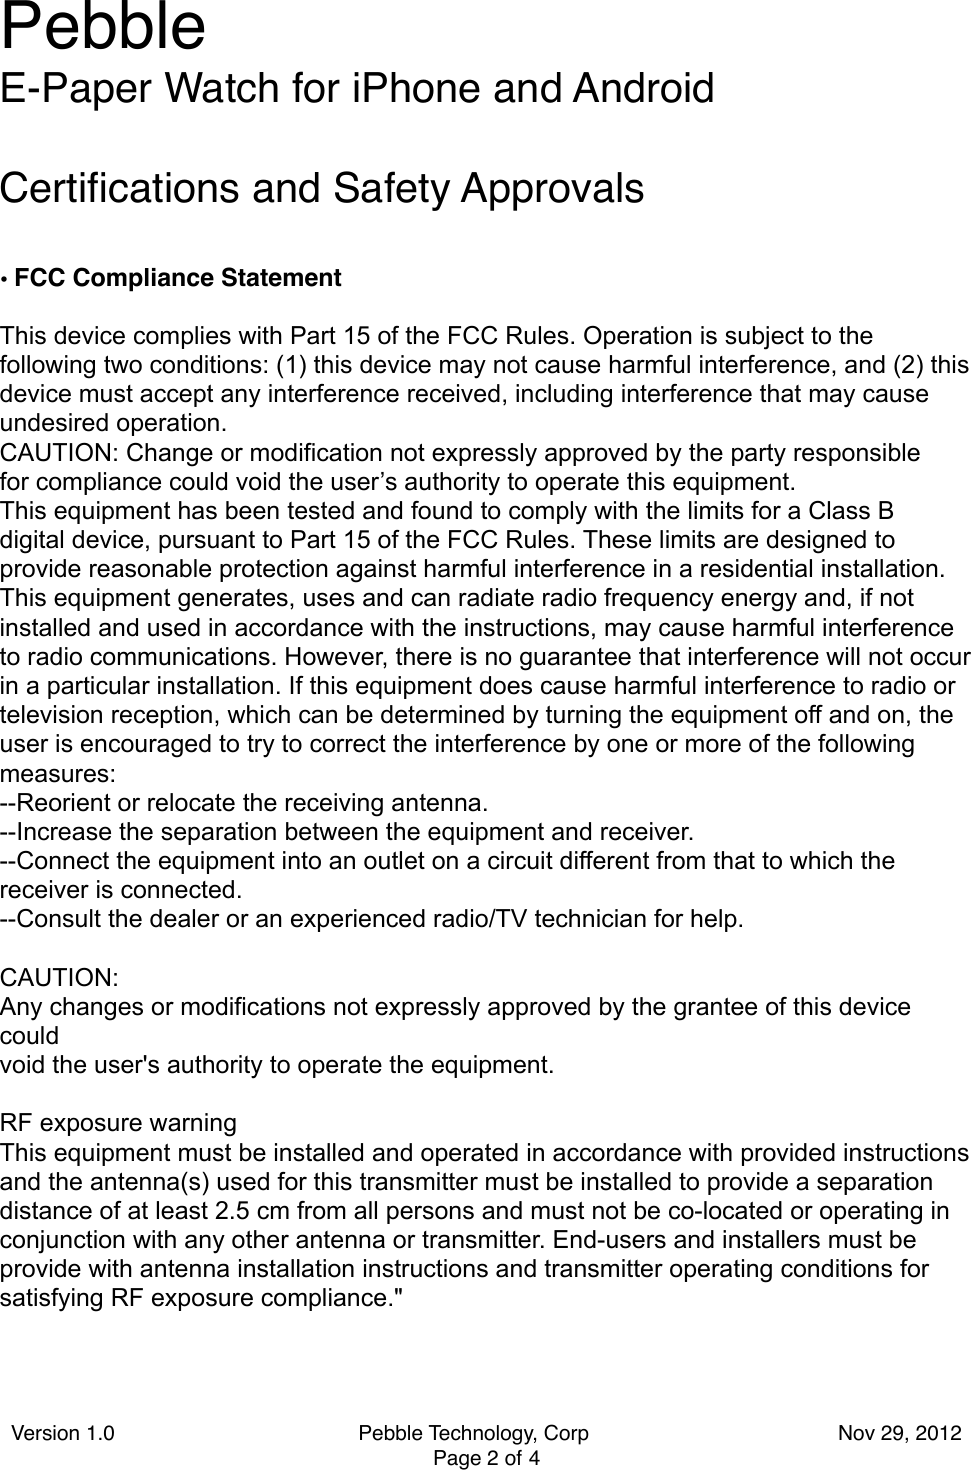 Certiﬁcations and Safety Approvals•FCC Compliance StatementThis device complies with Part 15 of the FCC Rules. Operation is subject to the following two conditions: (1) this device may not cause harmful interference, and (2) this  device must accept any interference received, including interference that may cause undesired operation.CAUTION: Change or modification not expressly approved by the party responsiblefor compliance could void the user’s authority to operate this equipment.This equipment has been tested and found to comply with the limits for a Class Bdigital device, pursuant to Part 15 of the FCC Rules. These limits are designed to provide reasonable protection against harmful interference in a residential installation. This equipment generates, uses and can radiate radio frequency energy and, if not installed and used in accordance with the instructions, may cause harmful interference to radio communications. However, there is no guarantee that interference will not occur in a particular installation. If this equipment does cause harmful interference to radio ortelevision reception, which can be determined by turning the equipment off and on, theuser is encouraged to try to correct the interference by one or more of the followingmeasures:--Reorient or relocate the receiving antenna.--Increase the separation between the equipment and receiver.--Connect the equipment into an outlet on a circuit different from that to which the receiver is connected.--Consult the dealer or an experienced radio/TV technician for help.CAUTION:Any changes or modifications not expressly approved by the grantee of this device couldvoid the user&apos;s authority to operate the equipment.RF exposure warningThis equipment must be installed and operated in accordance with provided instructionsand the antenna(s) used for this transmitter must be installed to provide a separationdistance of at least 2.5 cm from all persons and must not be co-located or operating inconjunction with any other antenna or transmitter. End-users and installers must beprovide with antenna installation instructions and transmitter operating conditions forsatisfying RF exposure compliance.&quot;Pebble E-Paper Watch for iPhone and AndroidVersion 1.0                                          Pebble Technology, Corp                                           Nov 29, 2012 Page 2 of 4